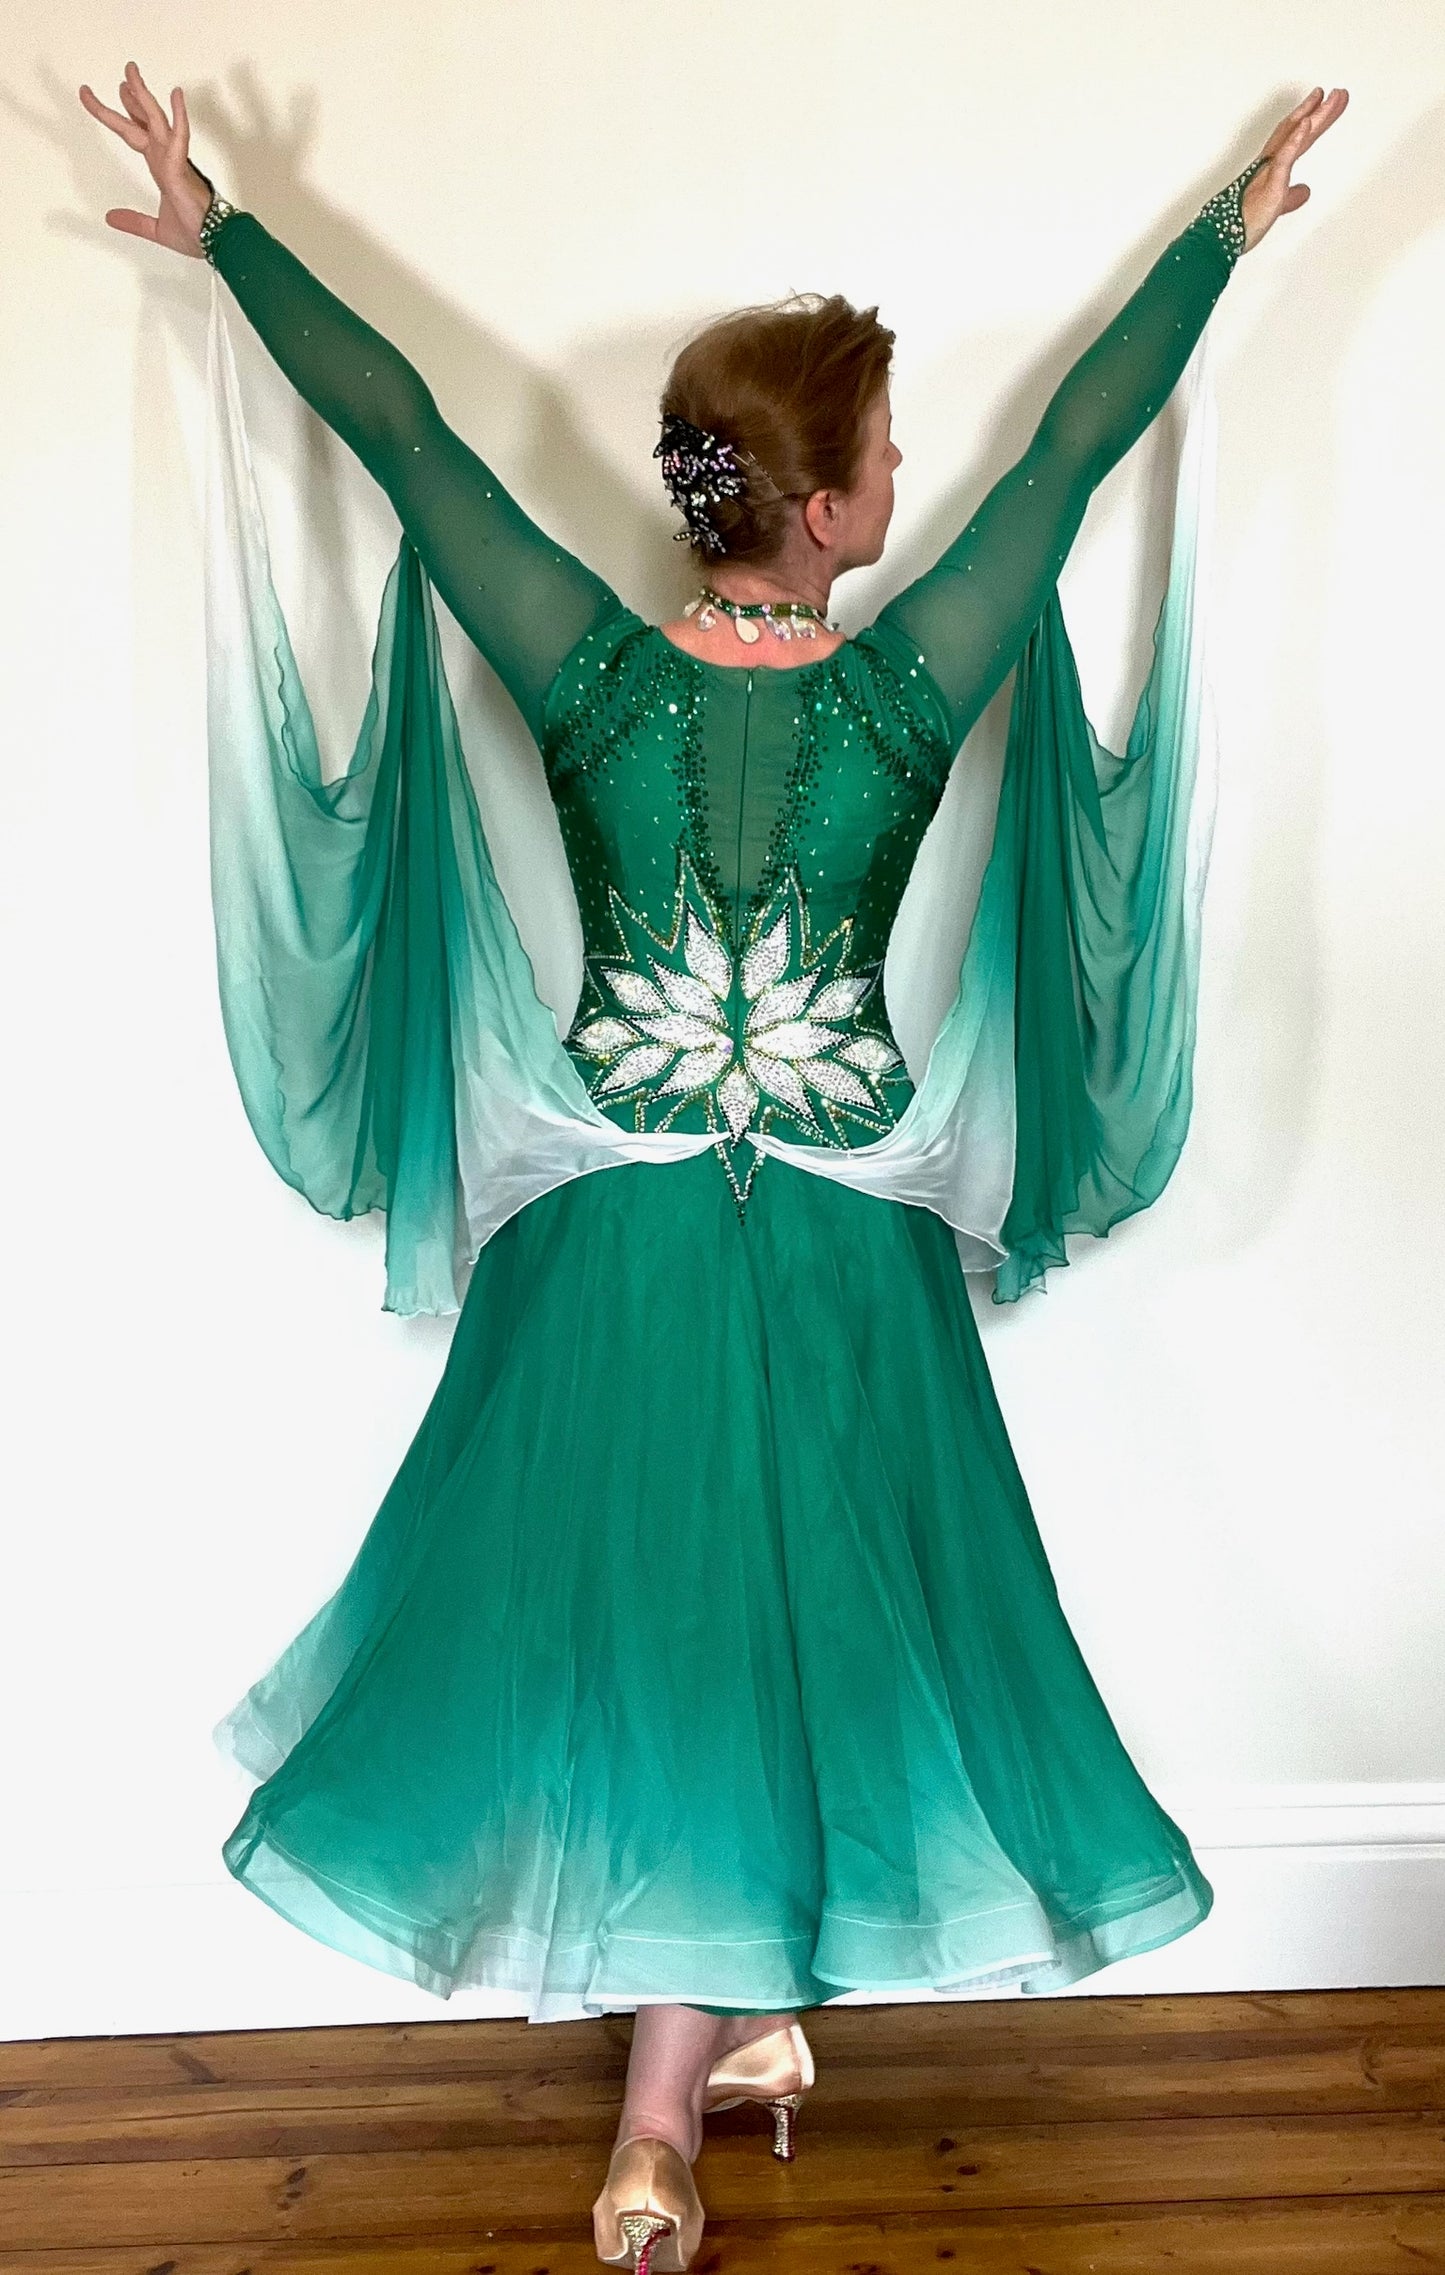 338 Emerald, Jade & White Ombré Ballroom Dress. Stunning decoration the the waist in White decorated with gold & AB stones. Dress decorated with light & dark green stones. Ombré floats to the back & sleeves.